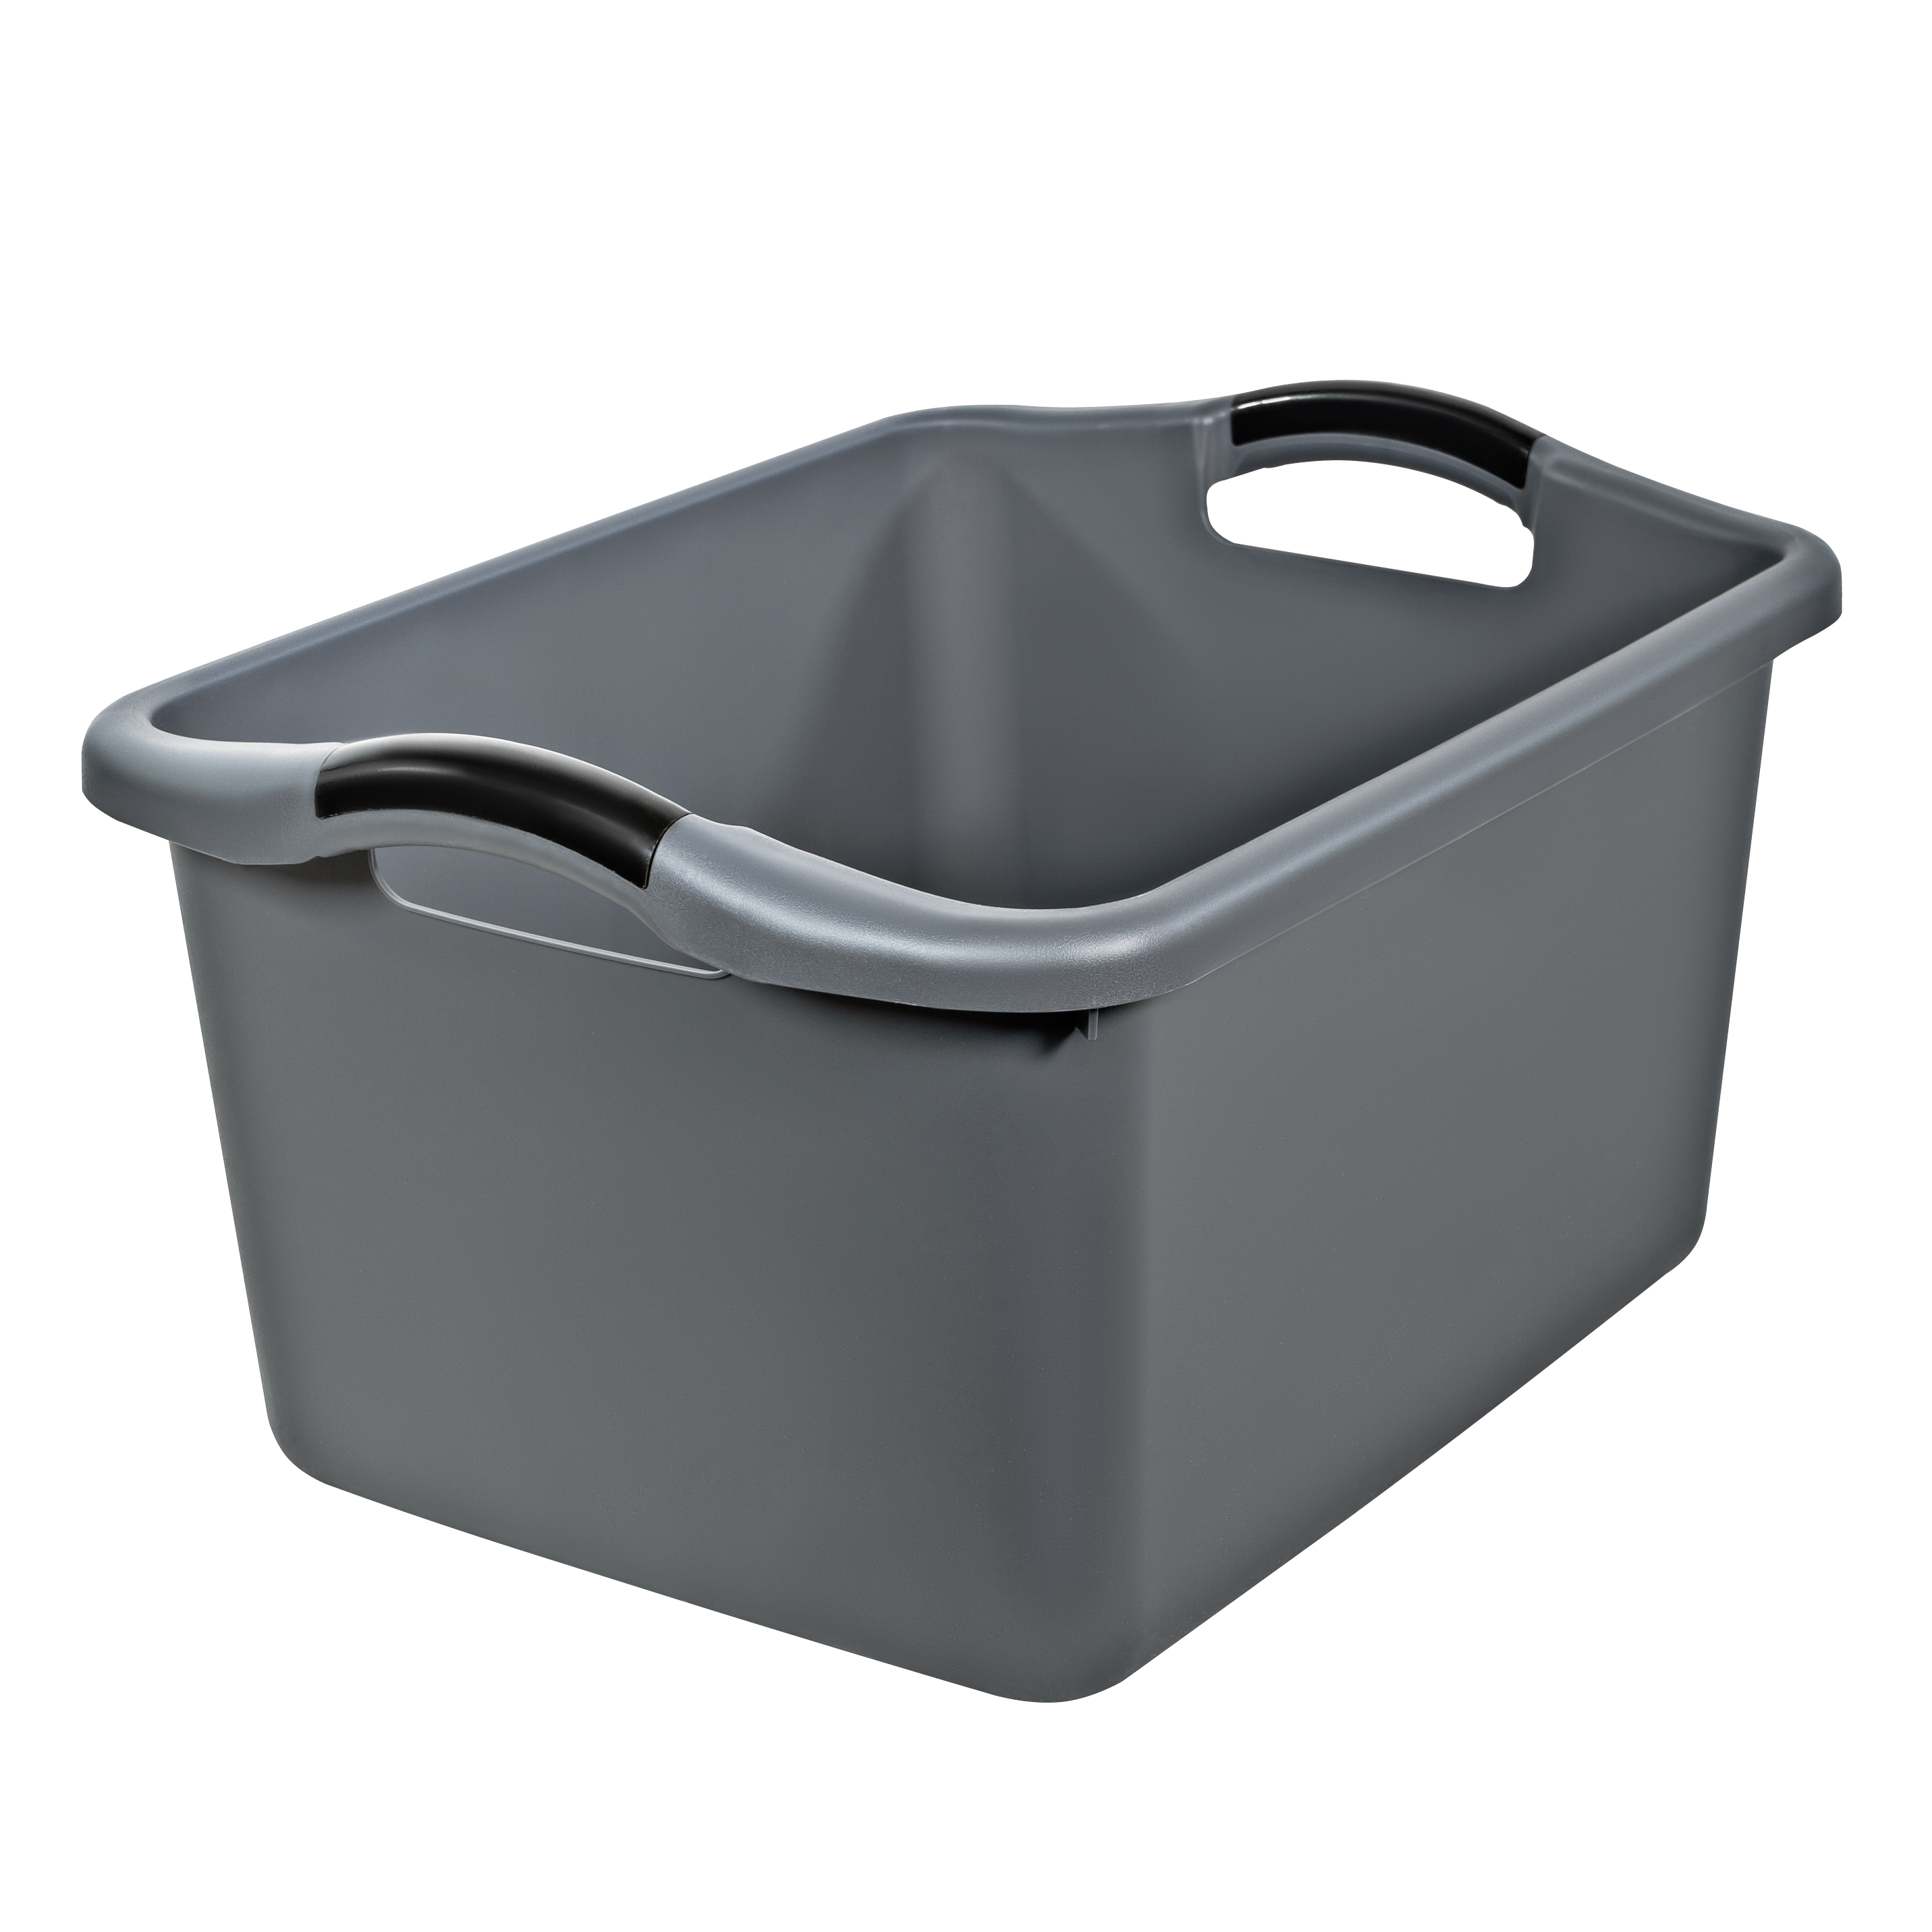 12 Gallon Hefty Pro Utility Storage Bin With Handles Walmart with proportions 2863 X 2863